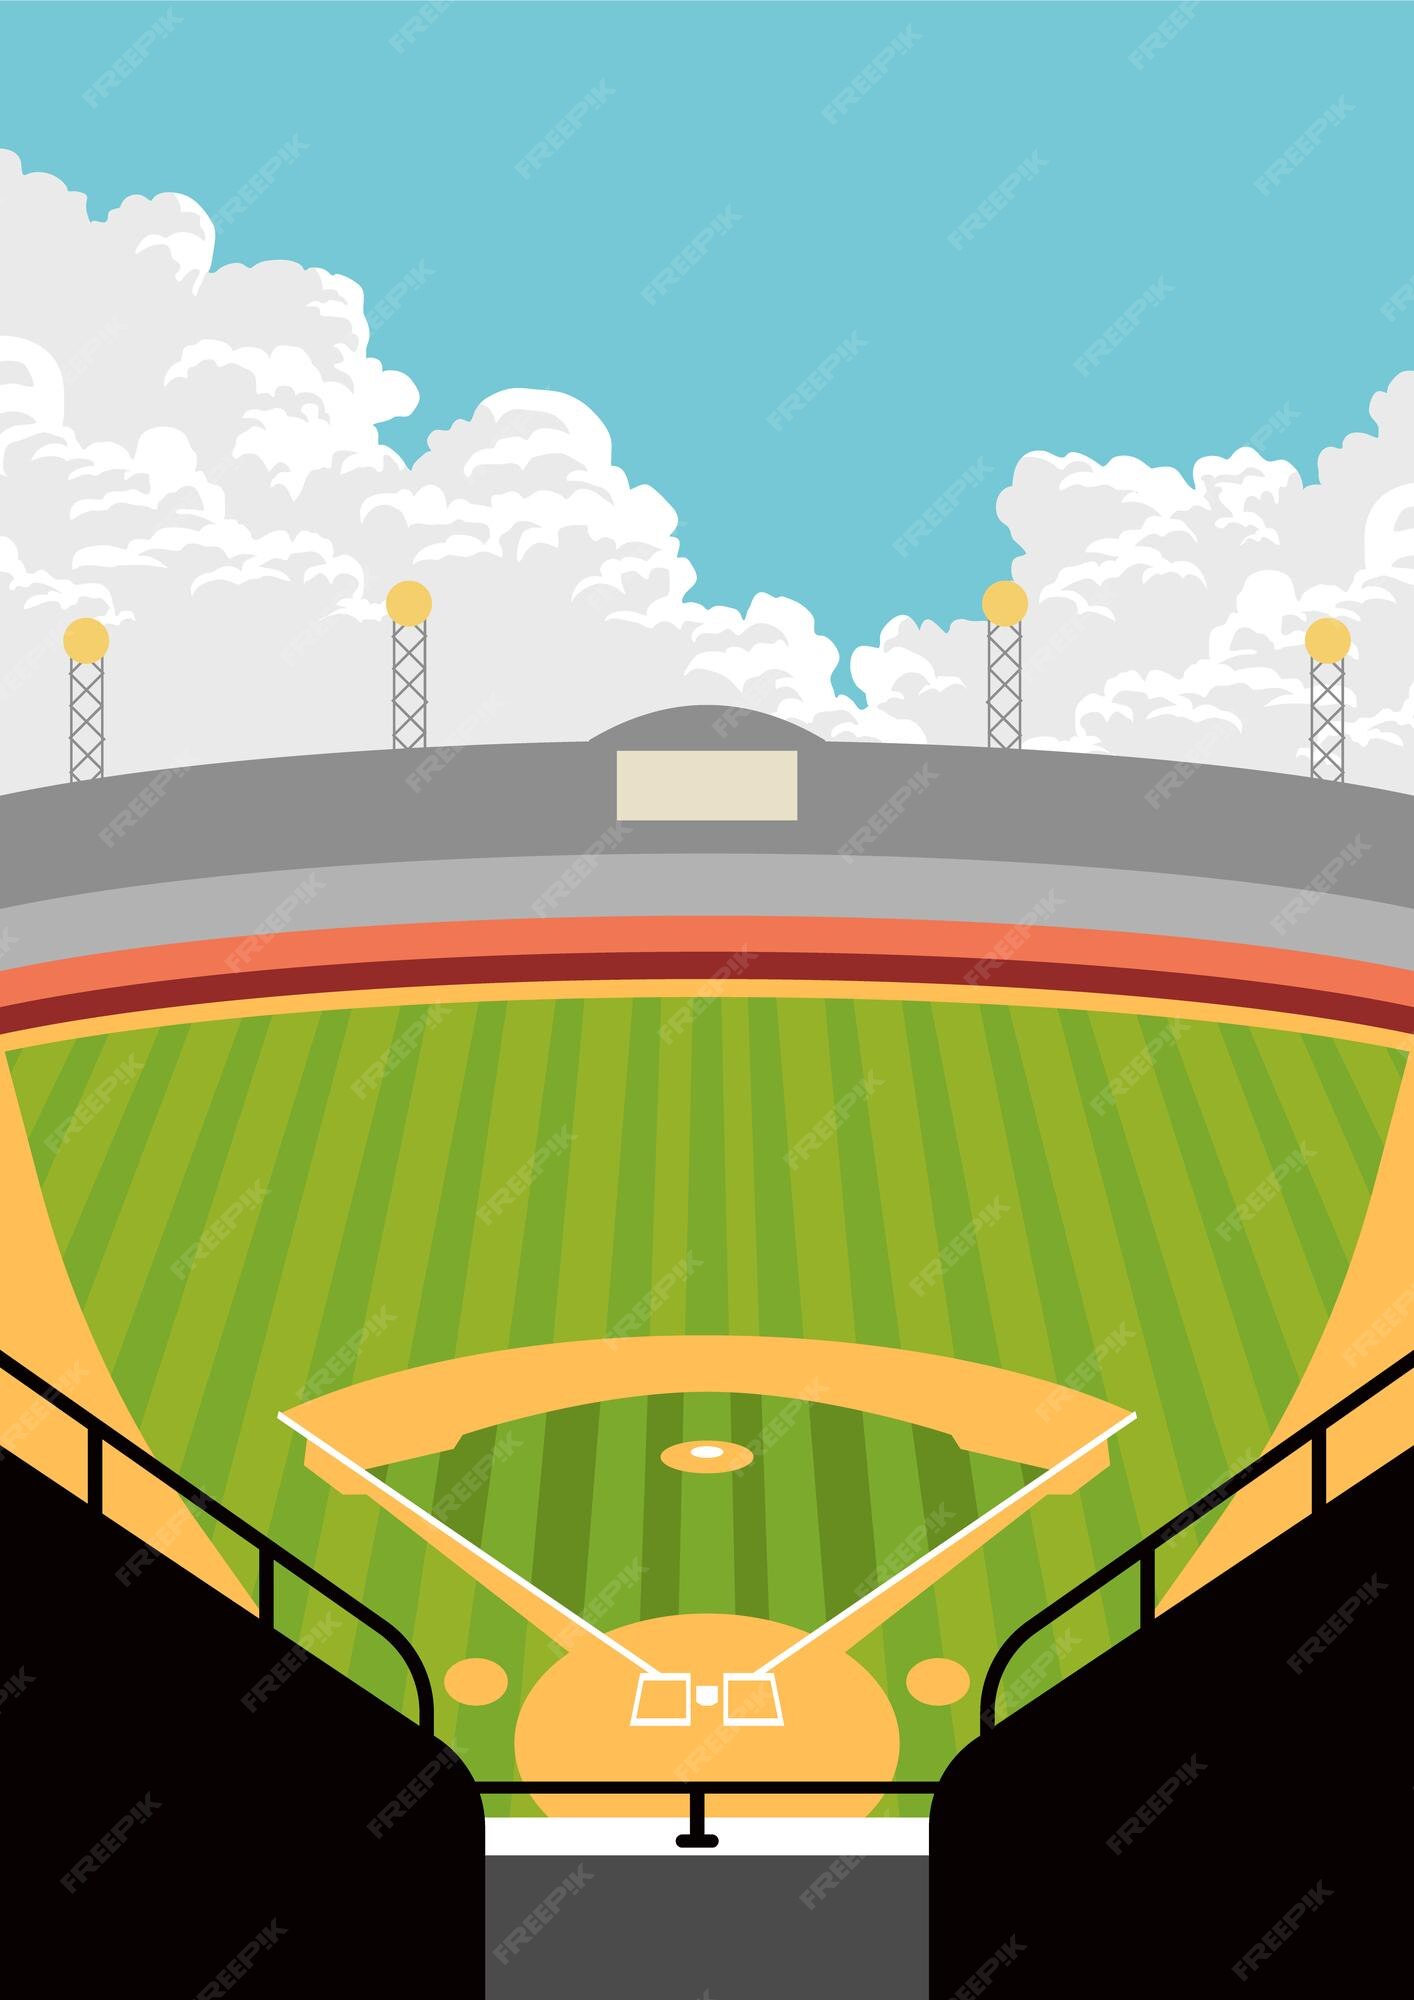 Baseball in outer space knock it out park Vector Image